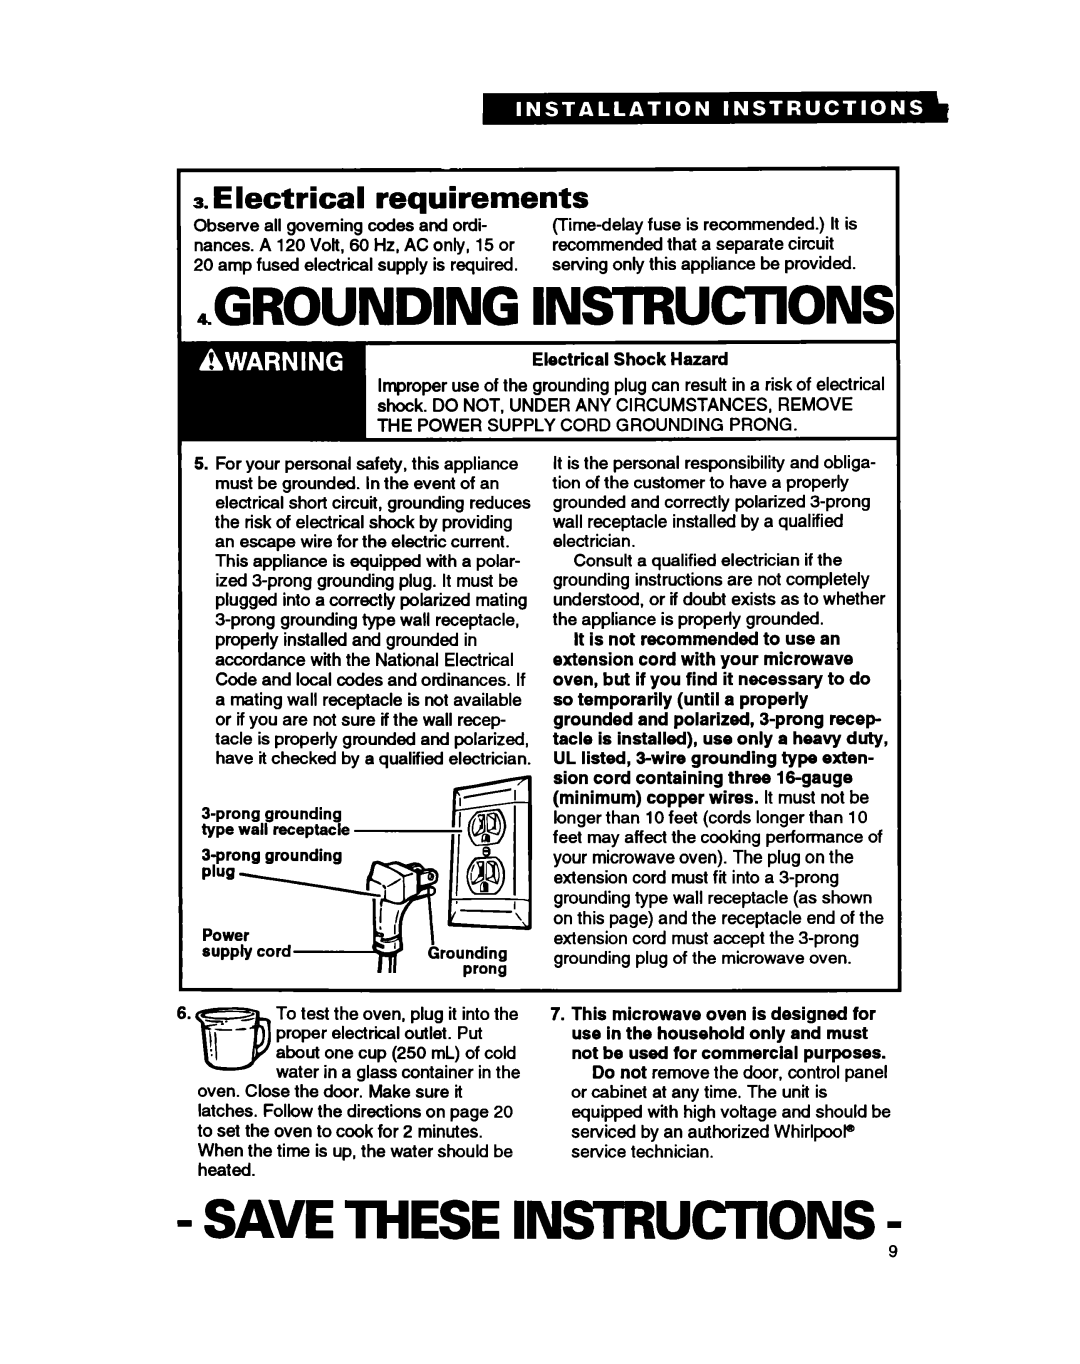 Whirlpool MC8130XA Grounding Instructions, Save These Instructions, Electrical requirements, Electrical Shock Hazard 